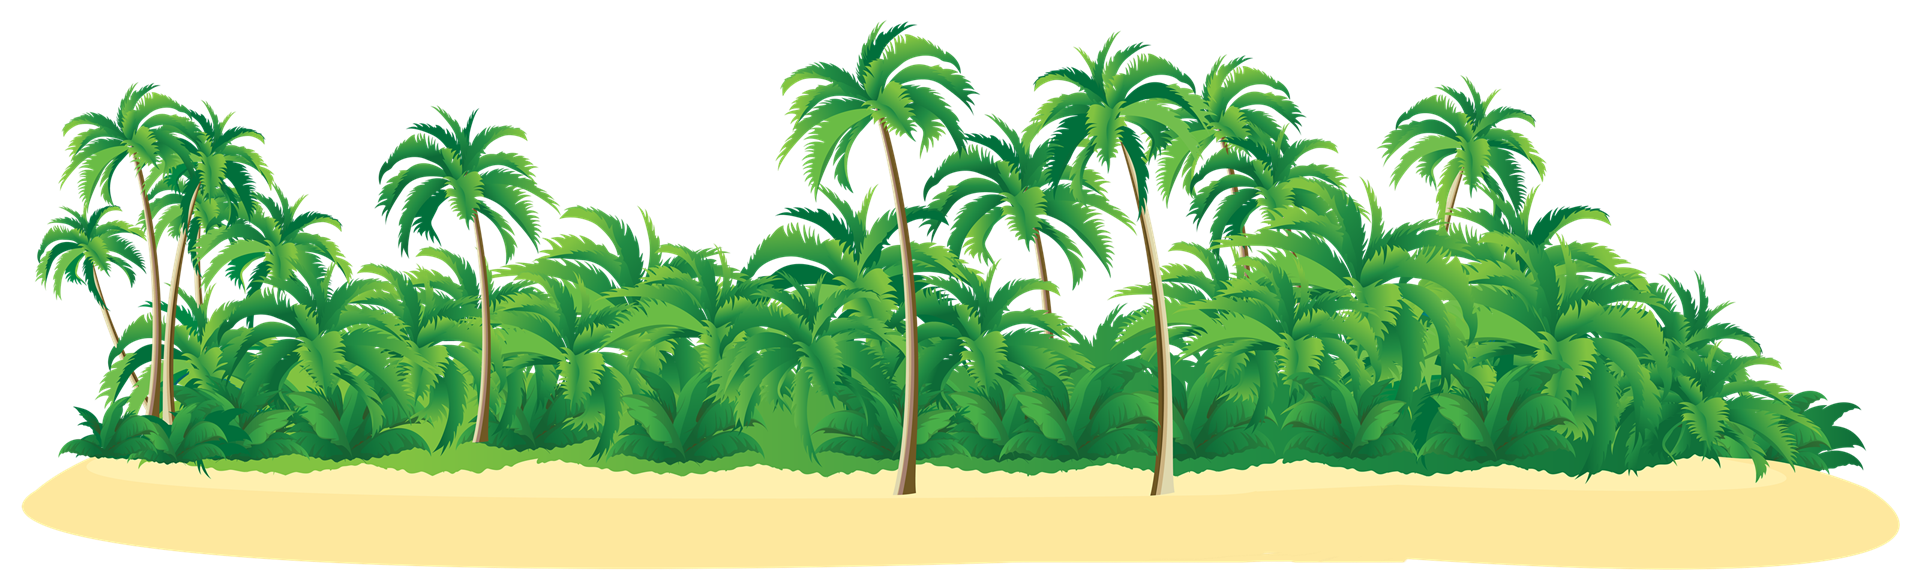 Island clipart holiday island. Free png transparent images